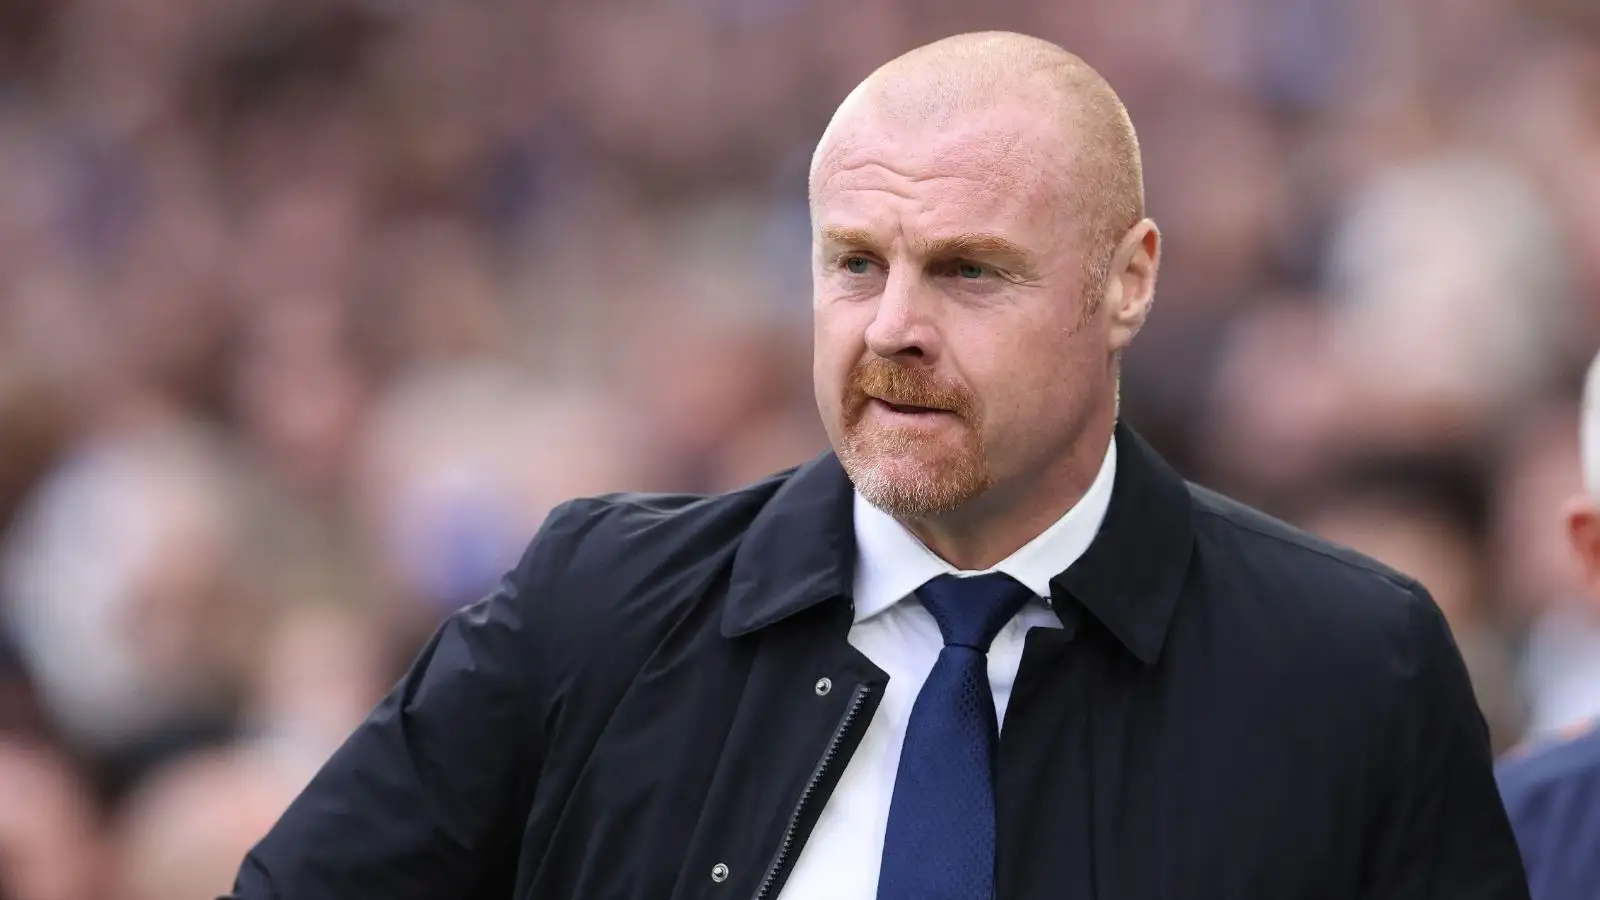 Everton boss Dyche admits relegation would 'change things;' but is planning  'a way forward' for club